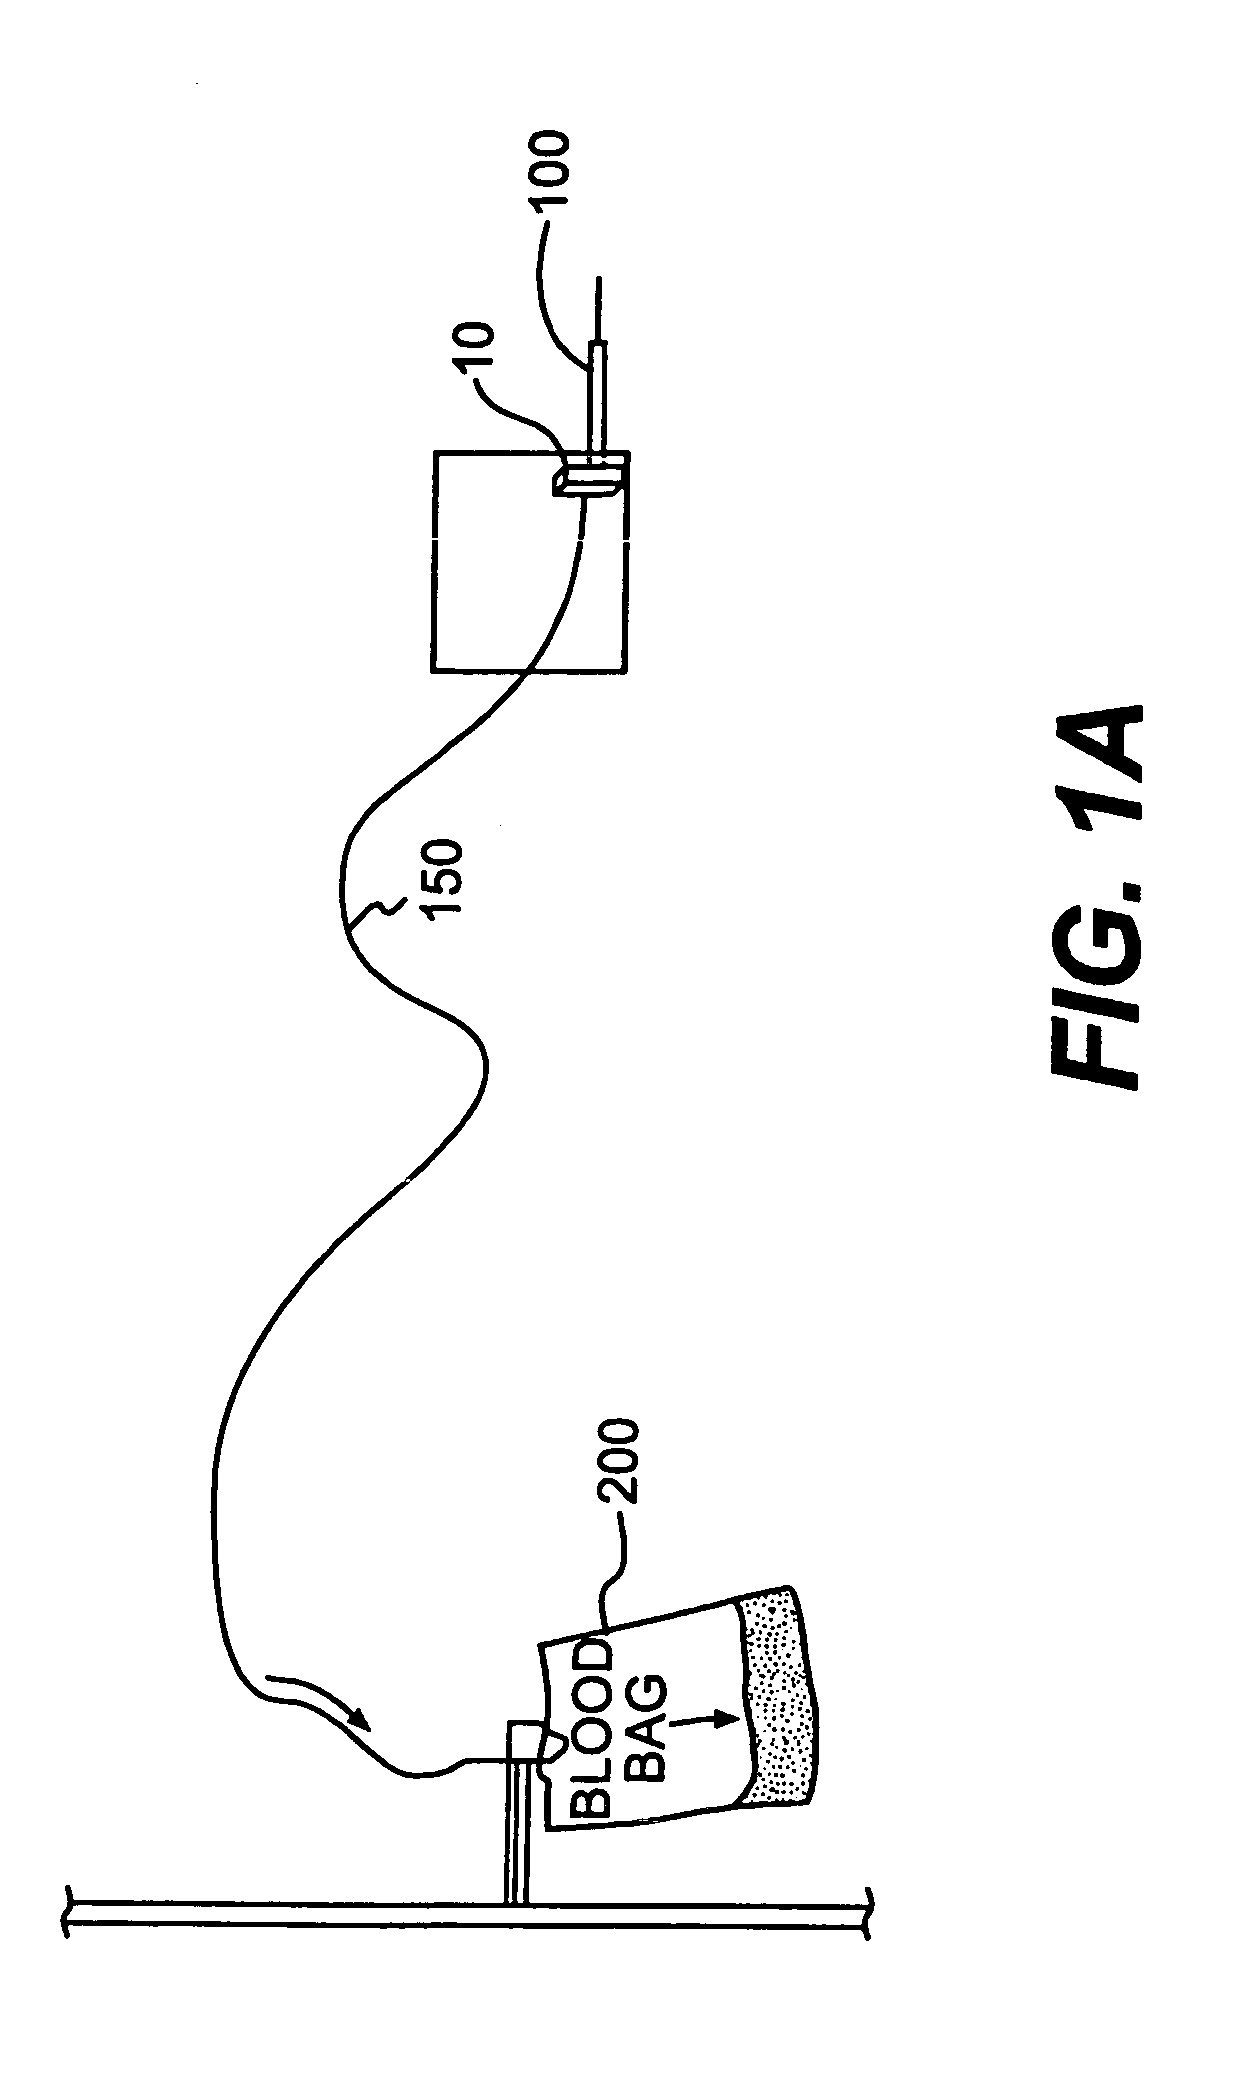 Device and method for in-line blood testing using biochips